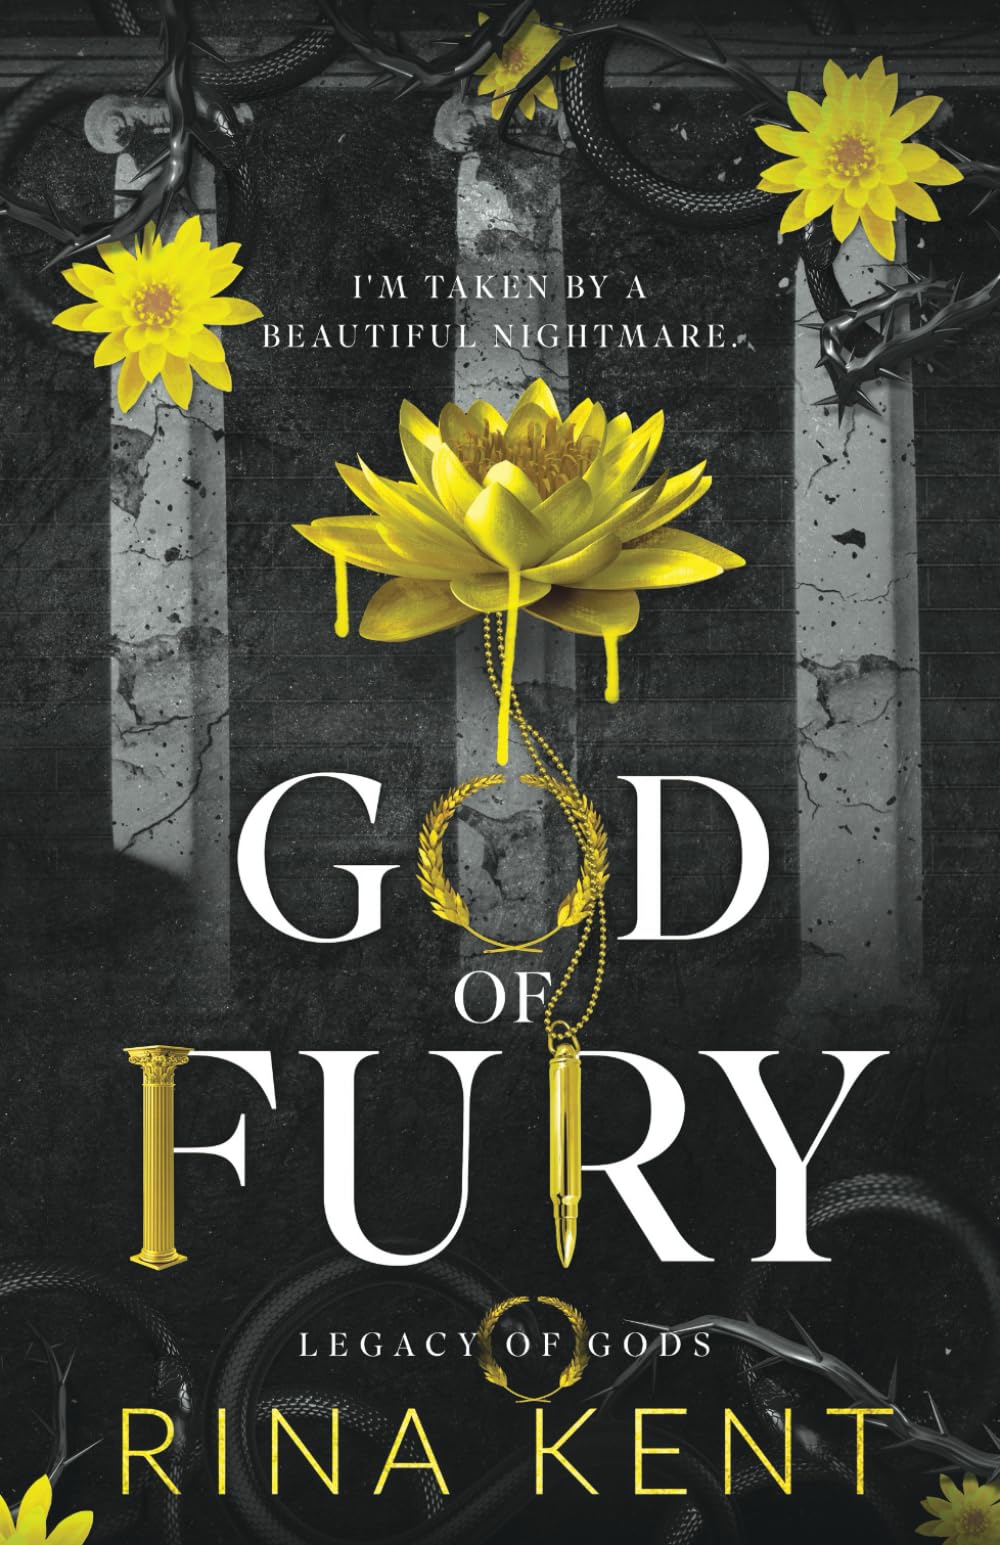 God of Fury: Special Edition Print (Legacy of Gods Special Edition)